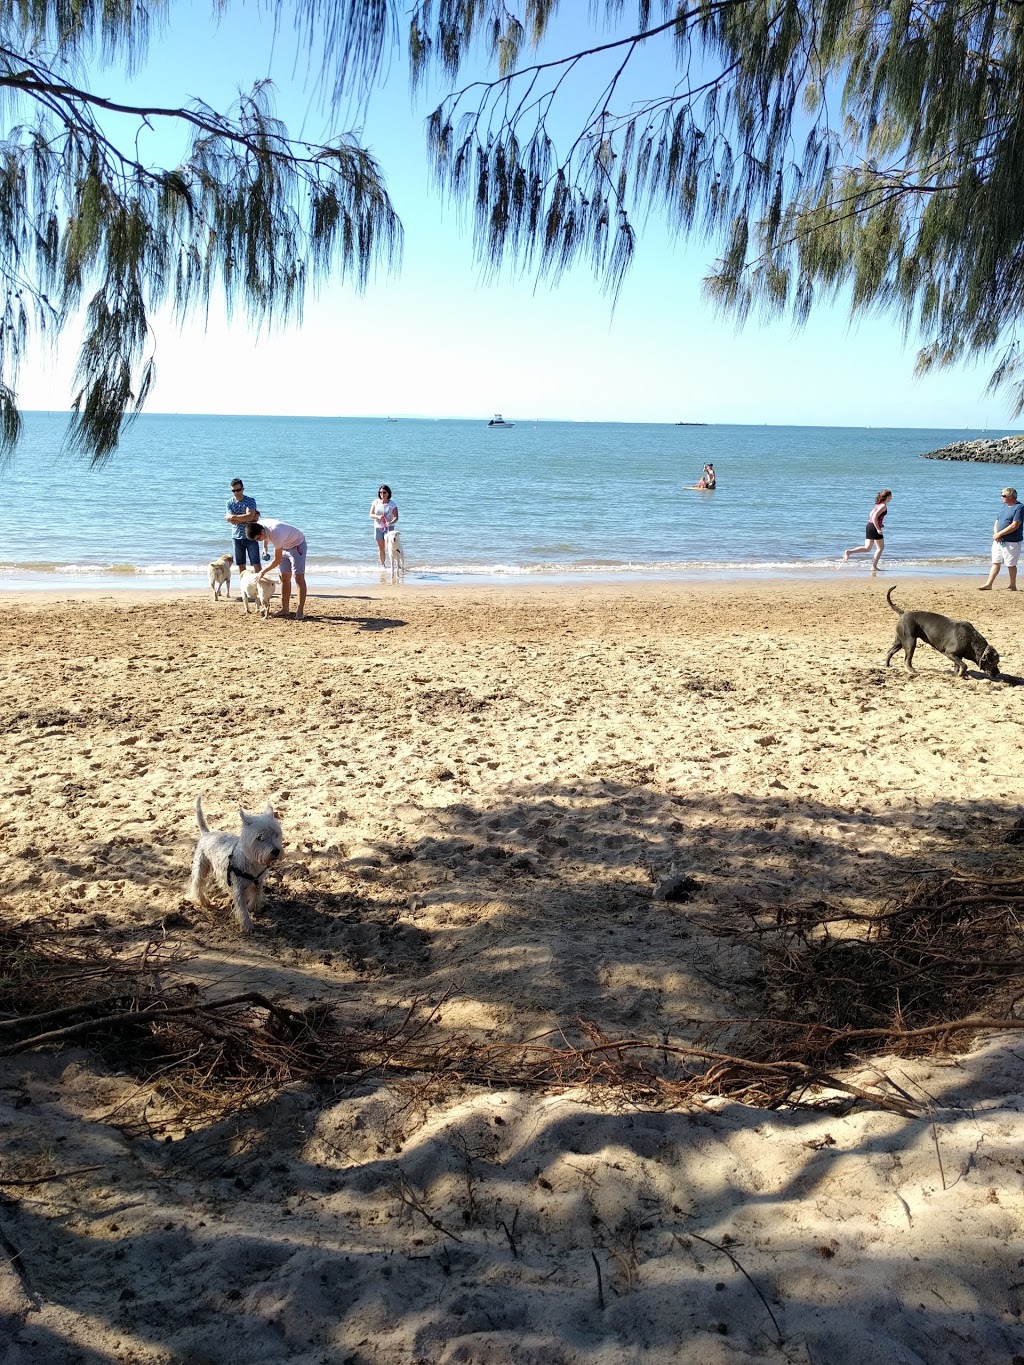 Raby Bay Foreshore Dog Off Leash Beach | park | Cleveland QLD 4163, Australia